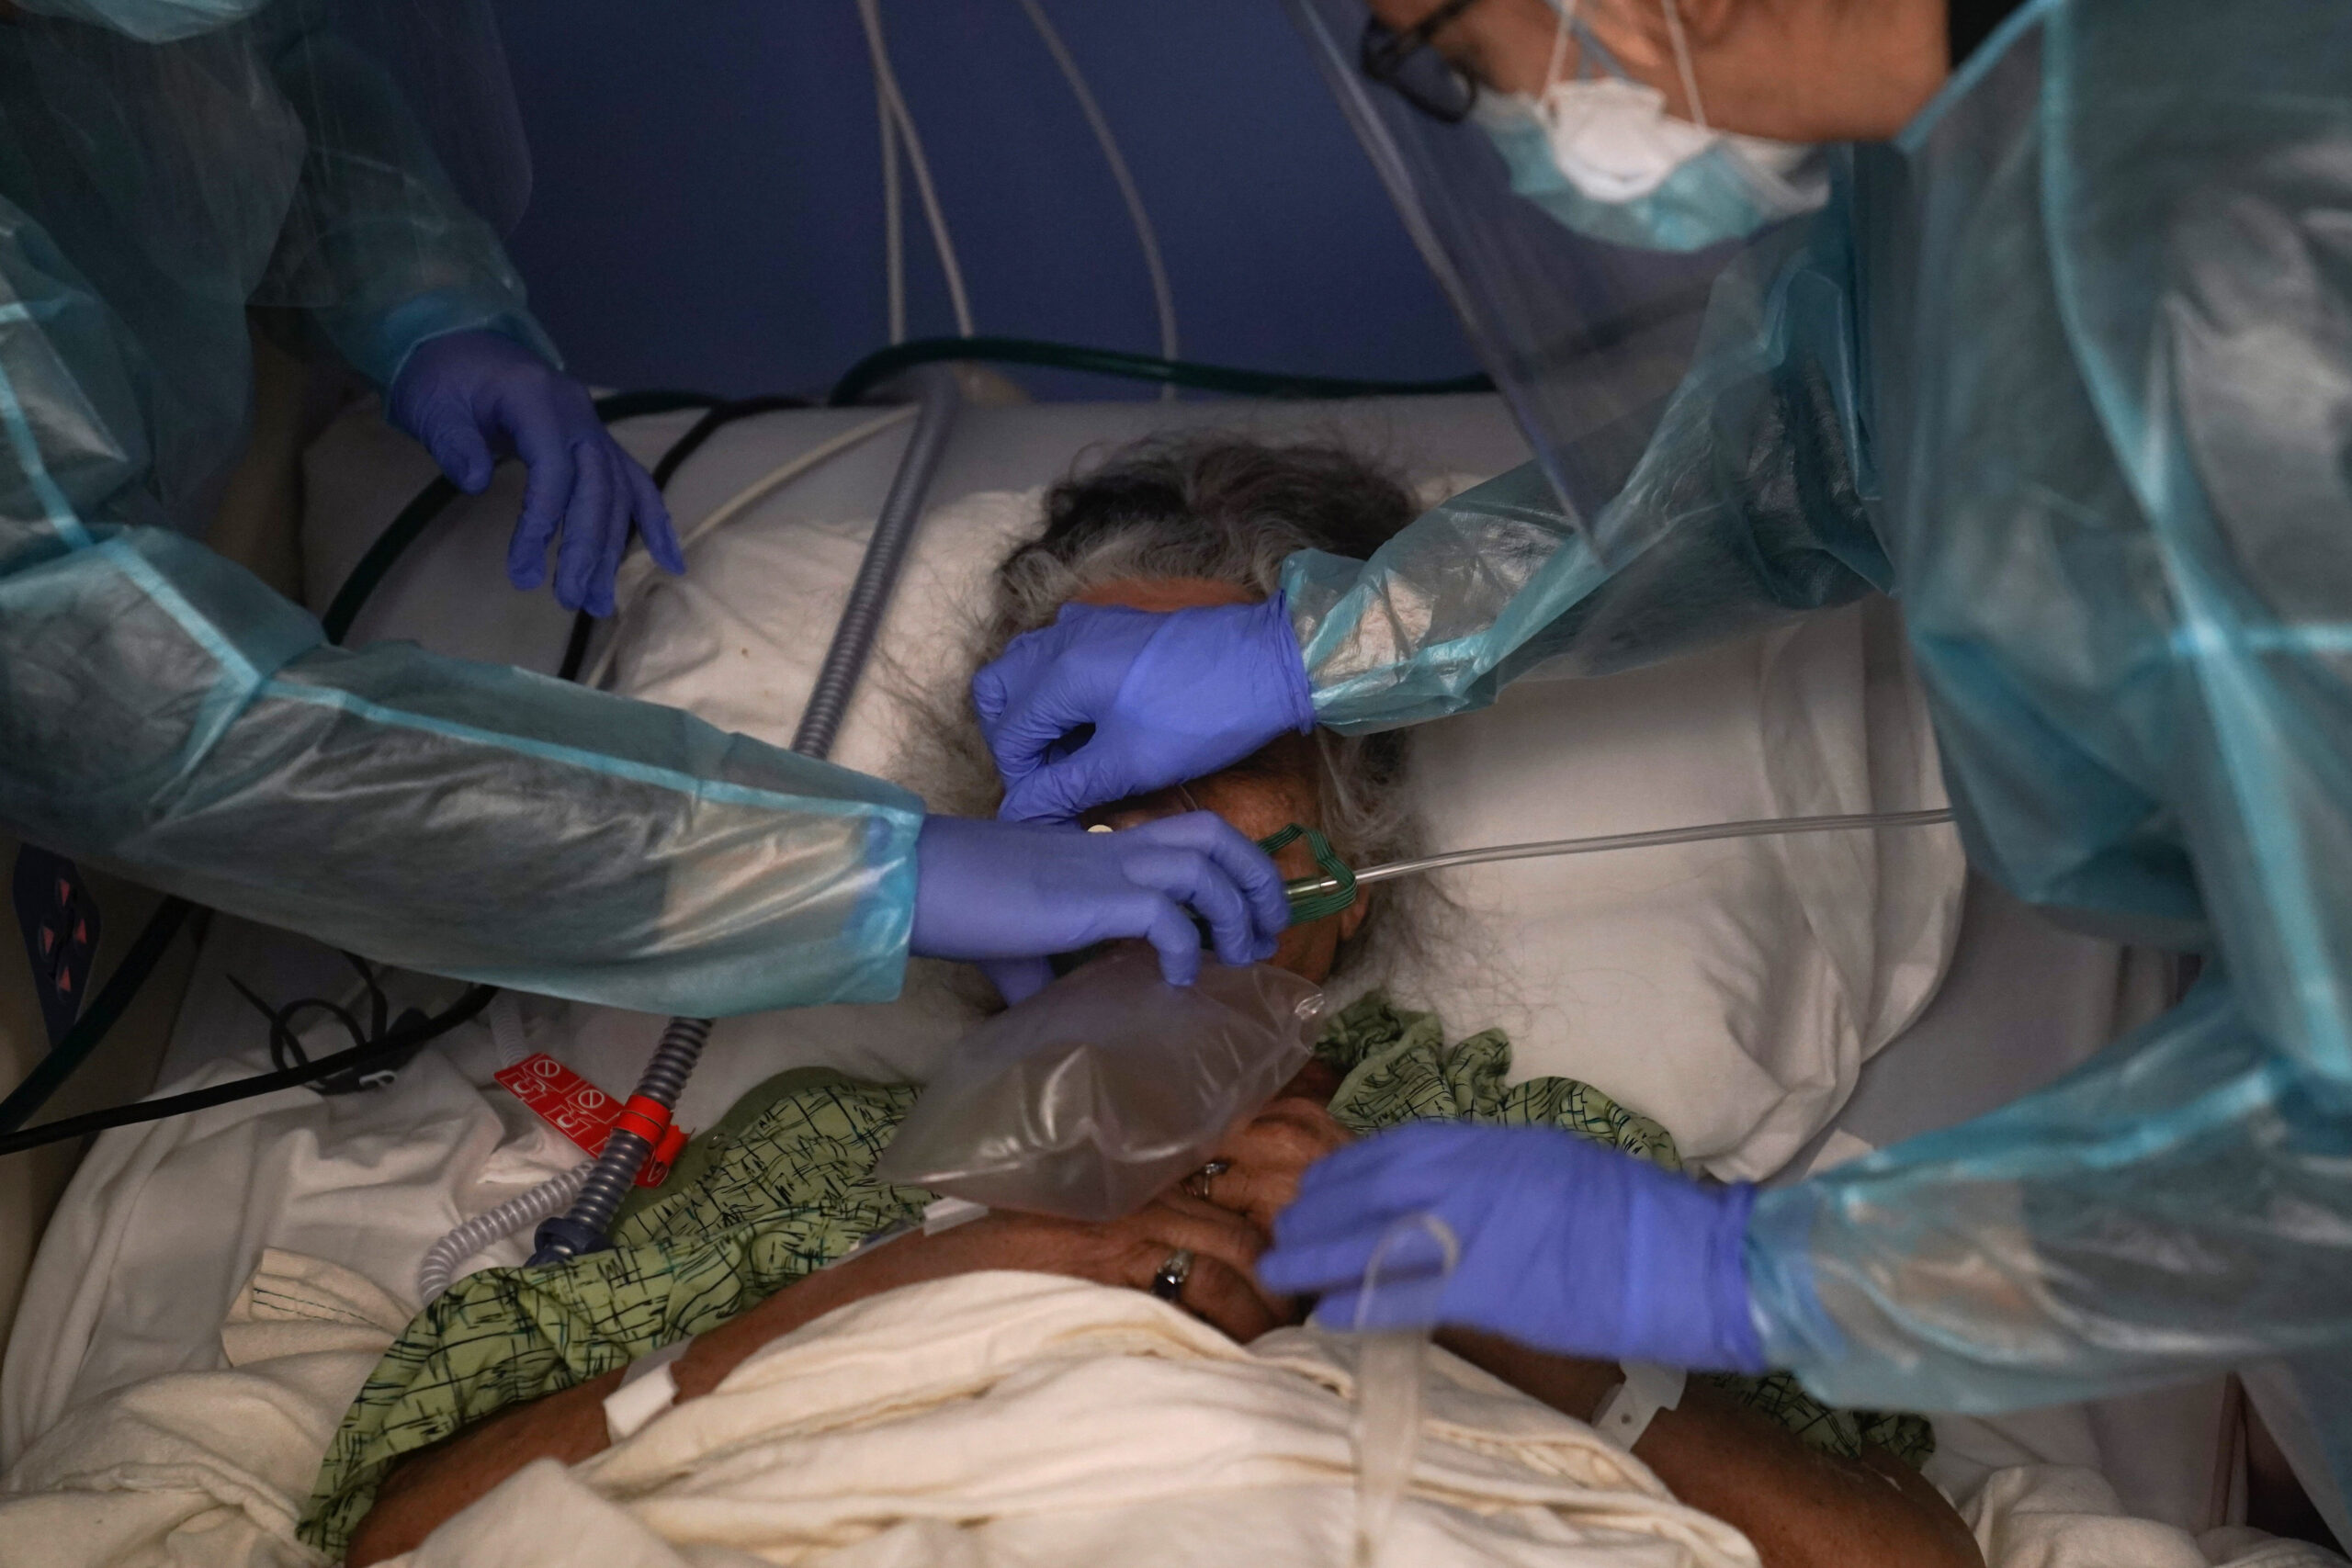 Two nurses put a ventilator on a patient in a Covid unit at St. Joseph Hospital in Orange, Calif. Jan. 2021. California's Covid emergency declaration ended on  Feb. 28, 2023, and the national emergency declaration ended on April 11